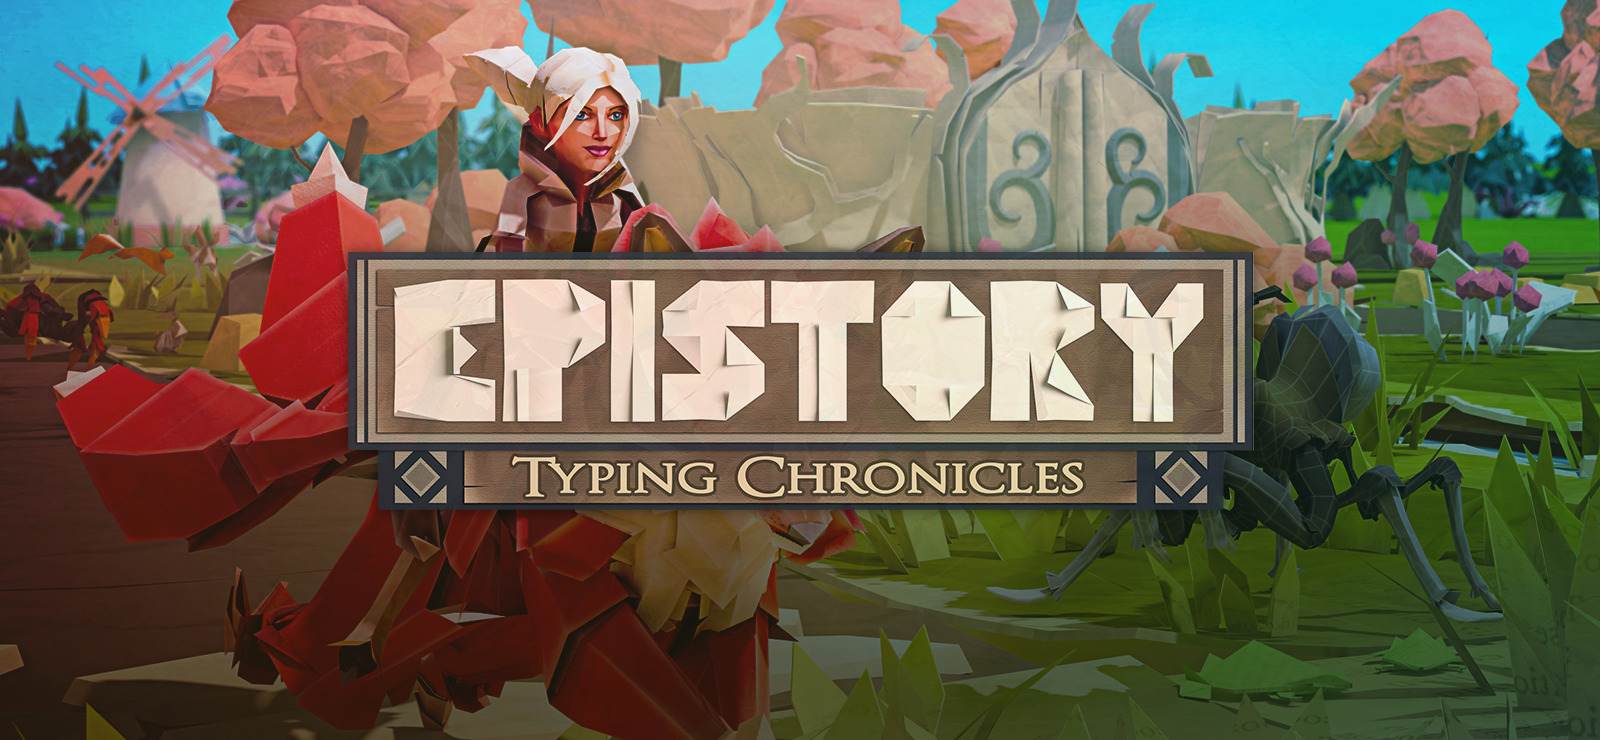 EPISTORY TYPING CHRONICLES 2023